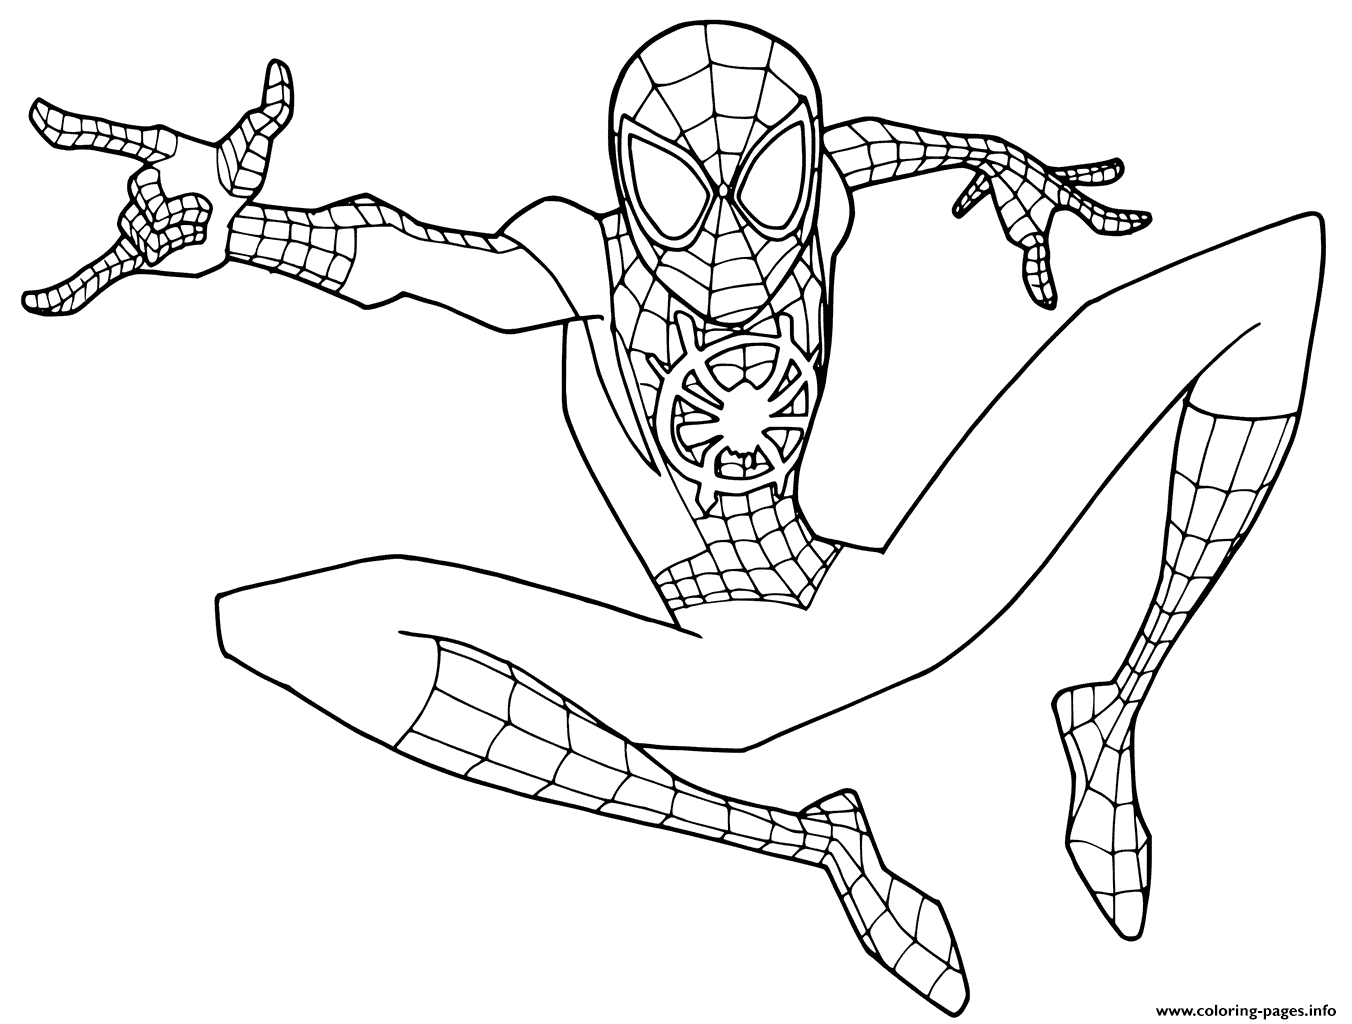 Print Young Spider Man coloring pages | Spider coloring page, Superhero coloring  pages, Spiderman coloring